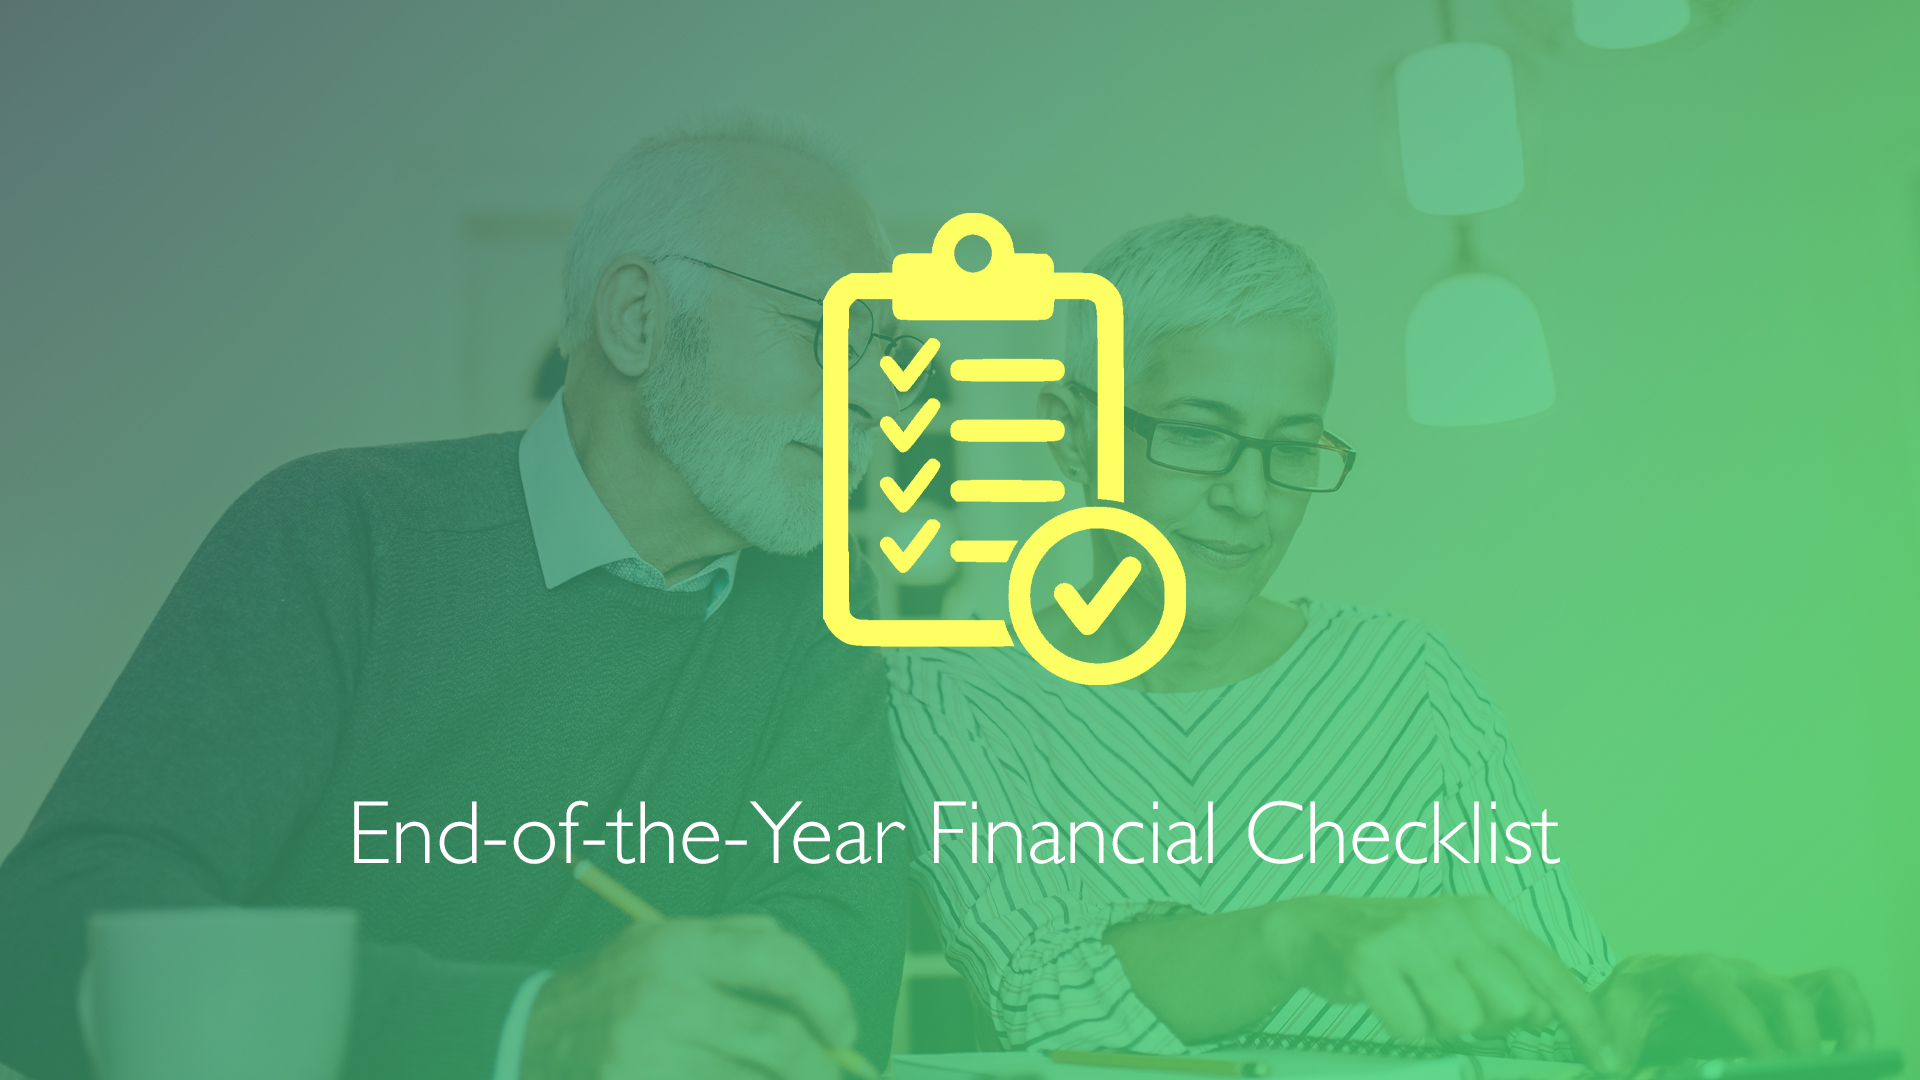 End-of-the-year financial checklist